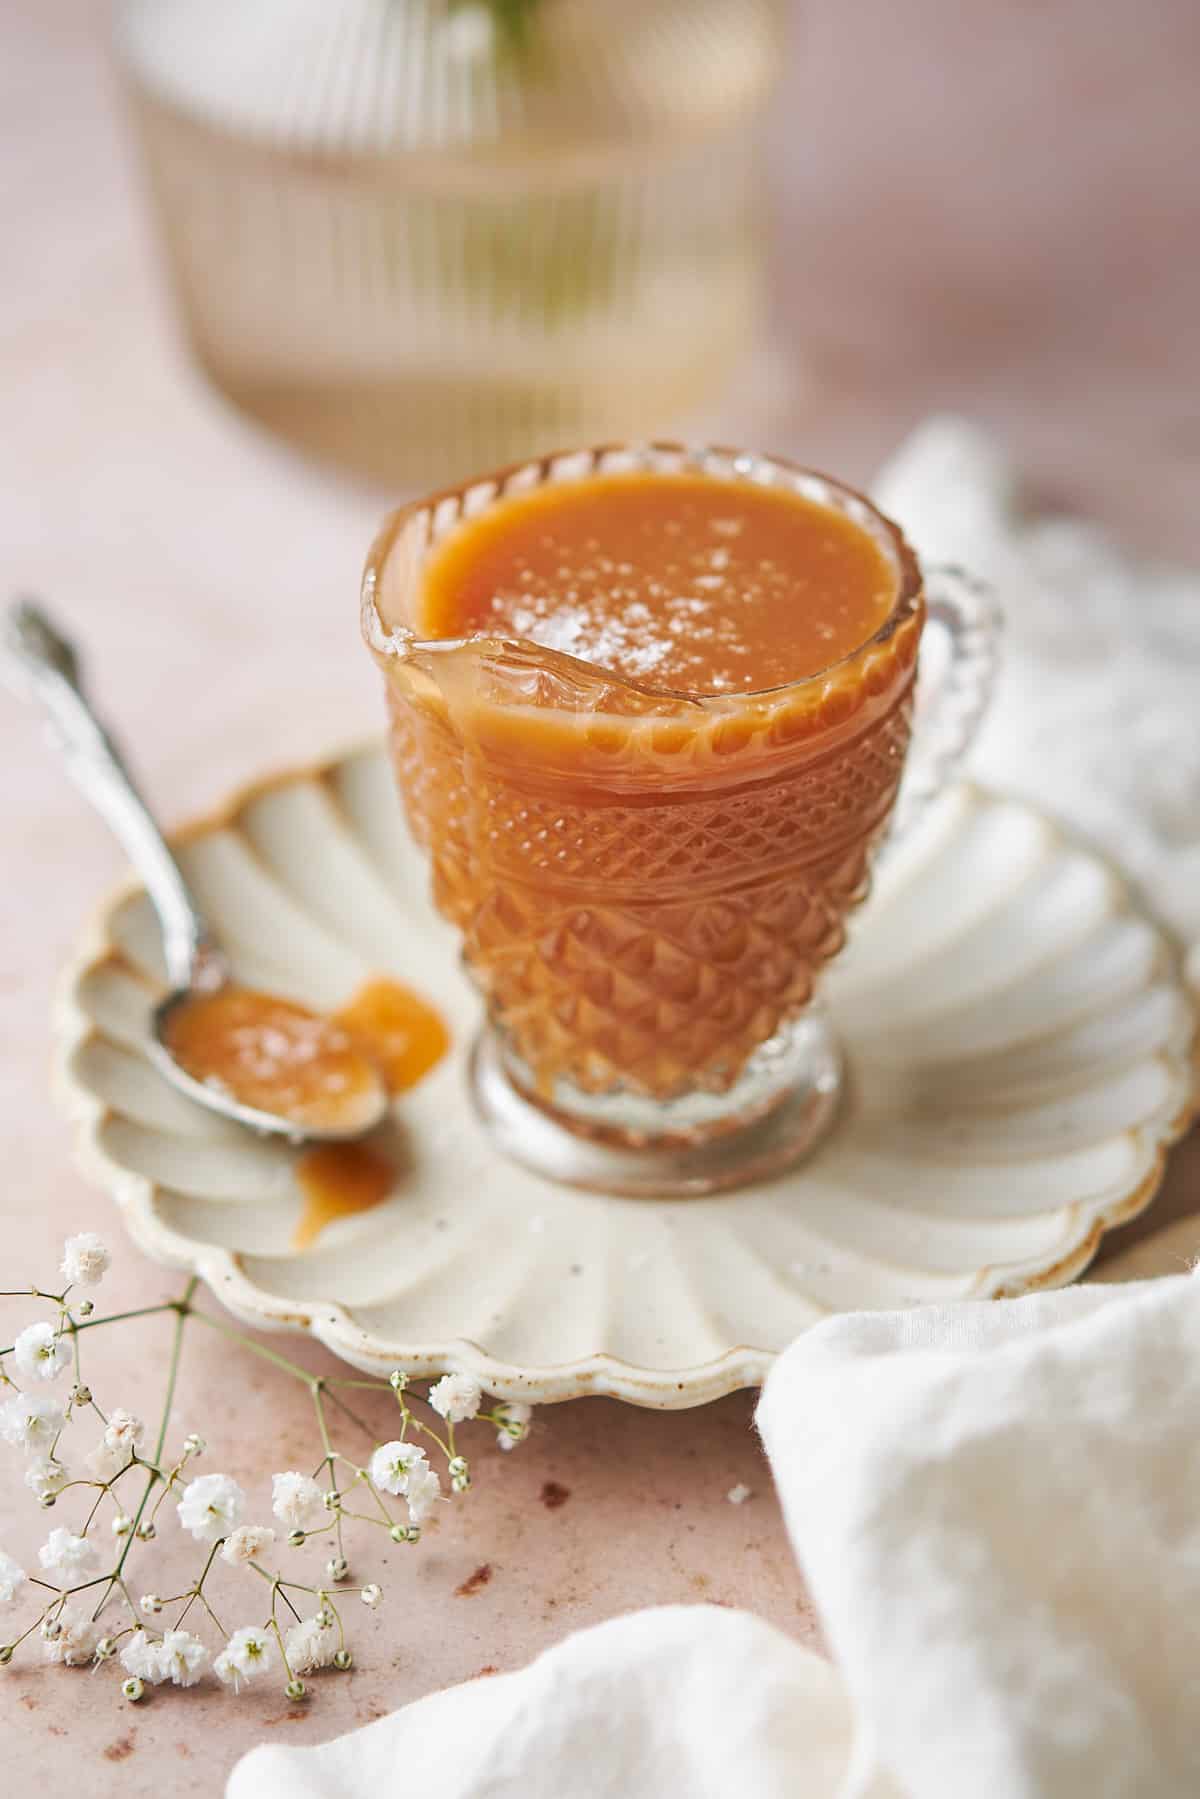 ornate glass jar with a spout full of slated caramel sauce on a ruffled plates, with a spoonful of caramel next to it. 